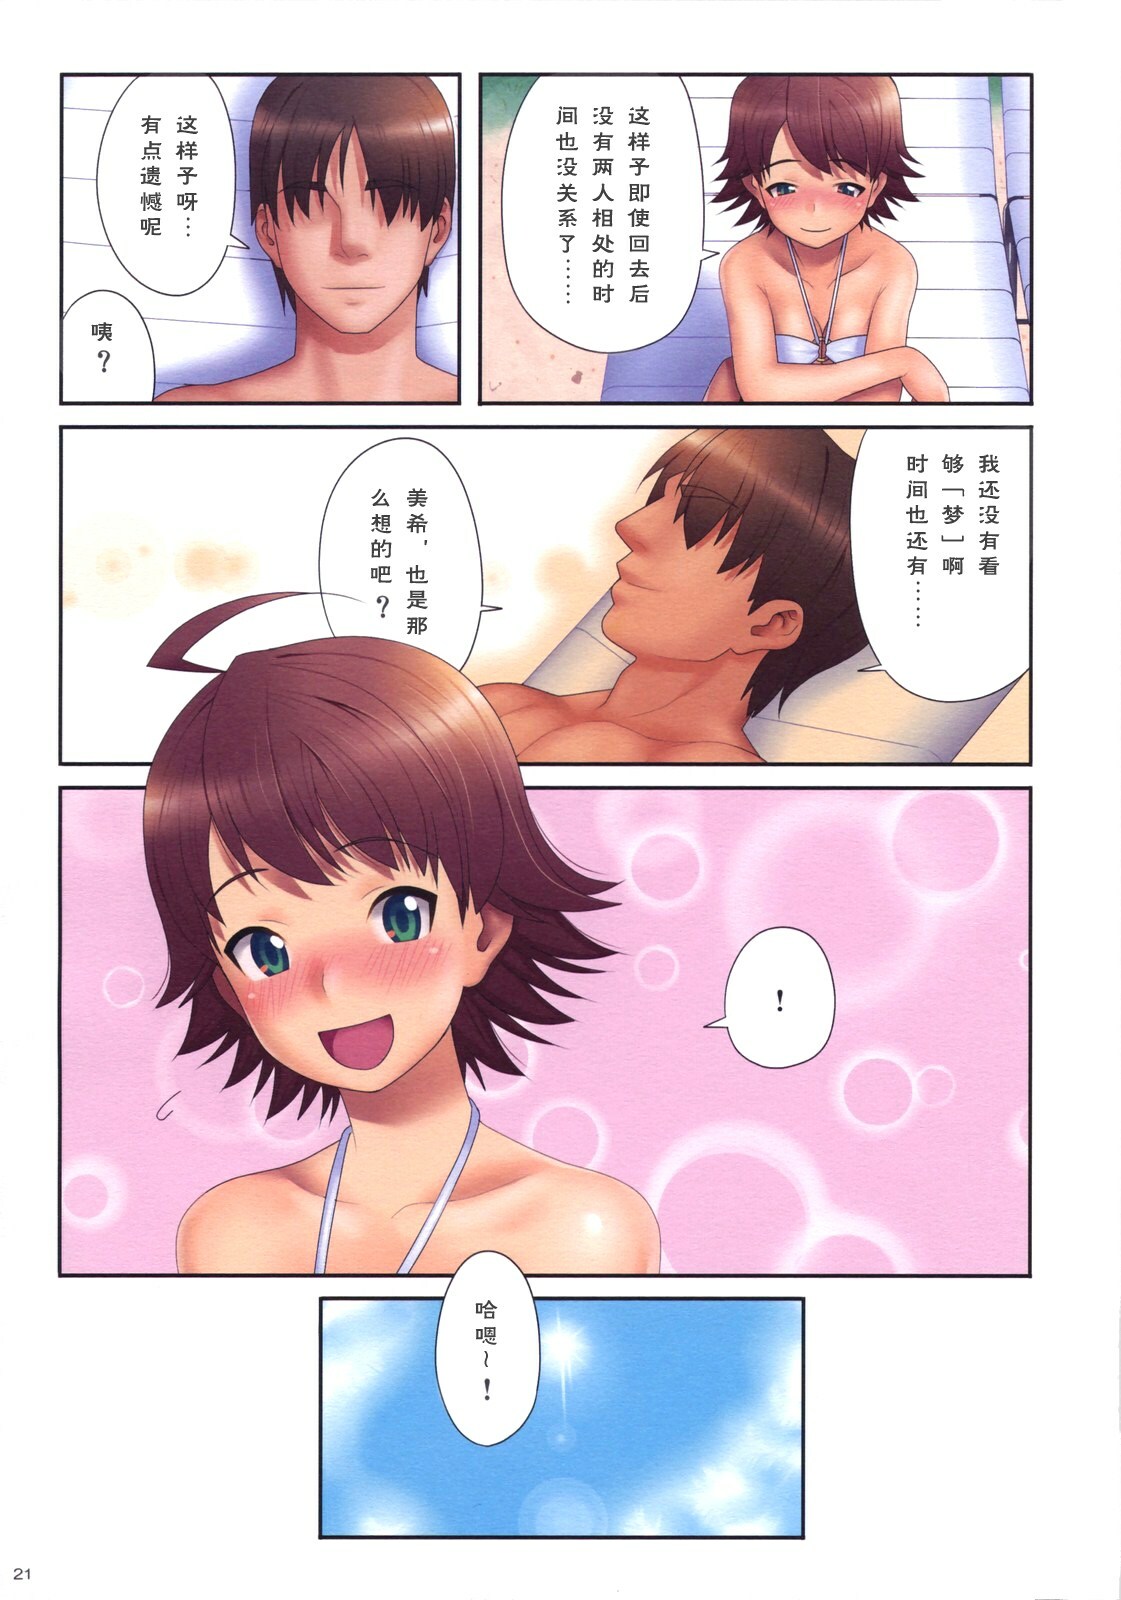 (CT12) [TNC. (Lunch)] Fourteen Plus (THE iDOLM@STER) [Chinese] [真实de汉化组] [Decensored] page 20 full